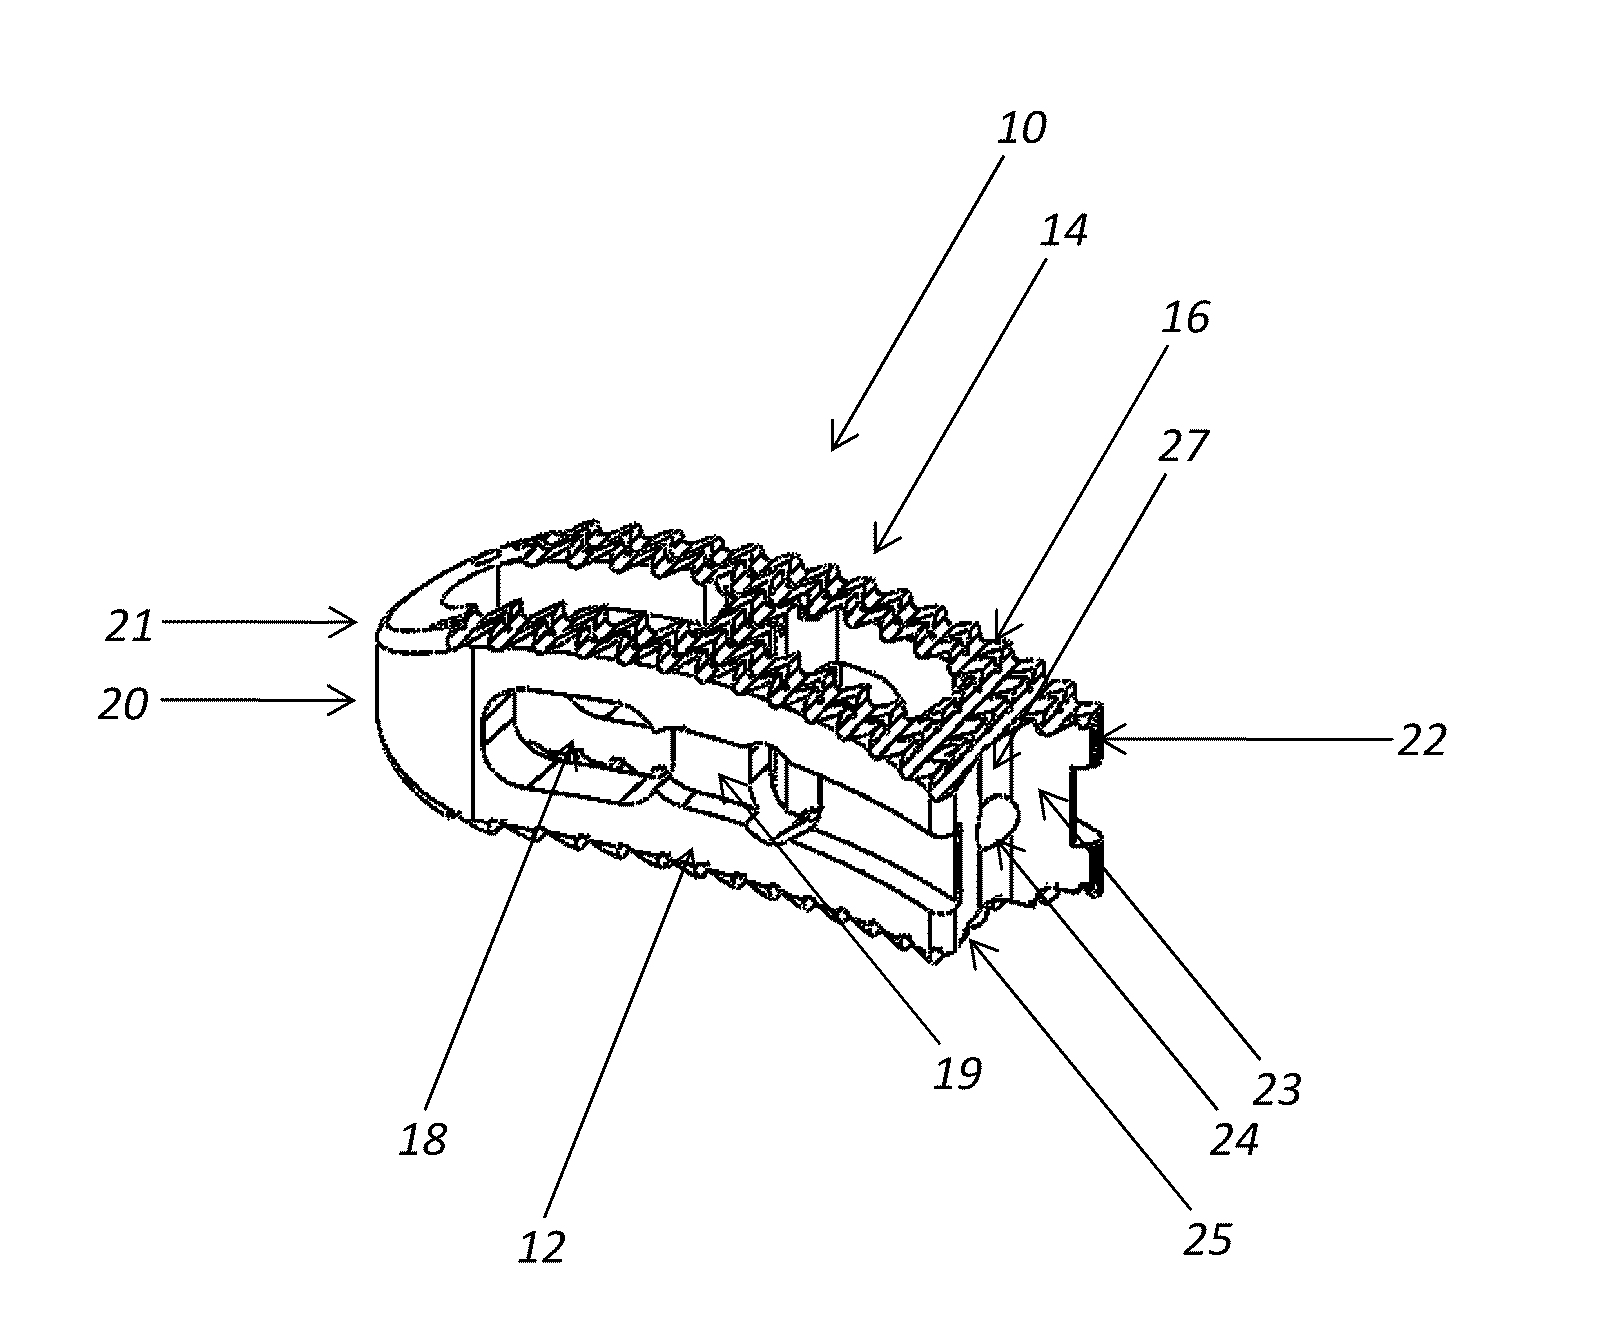 Intervertebral implant device for a posterior interbody fusion surgical procedure